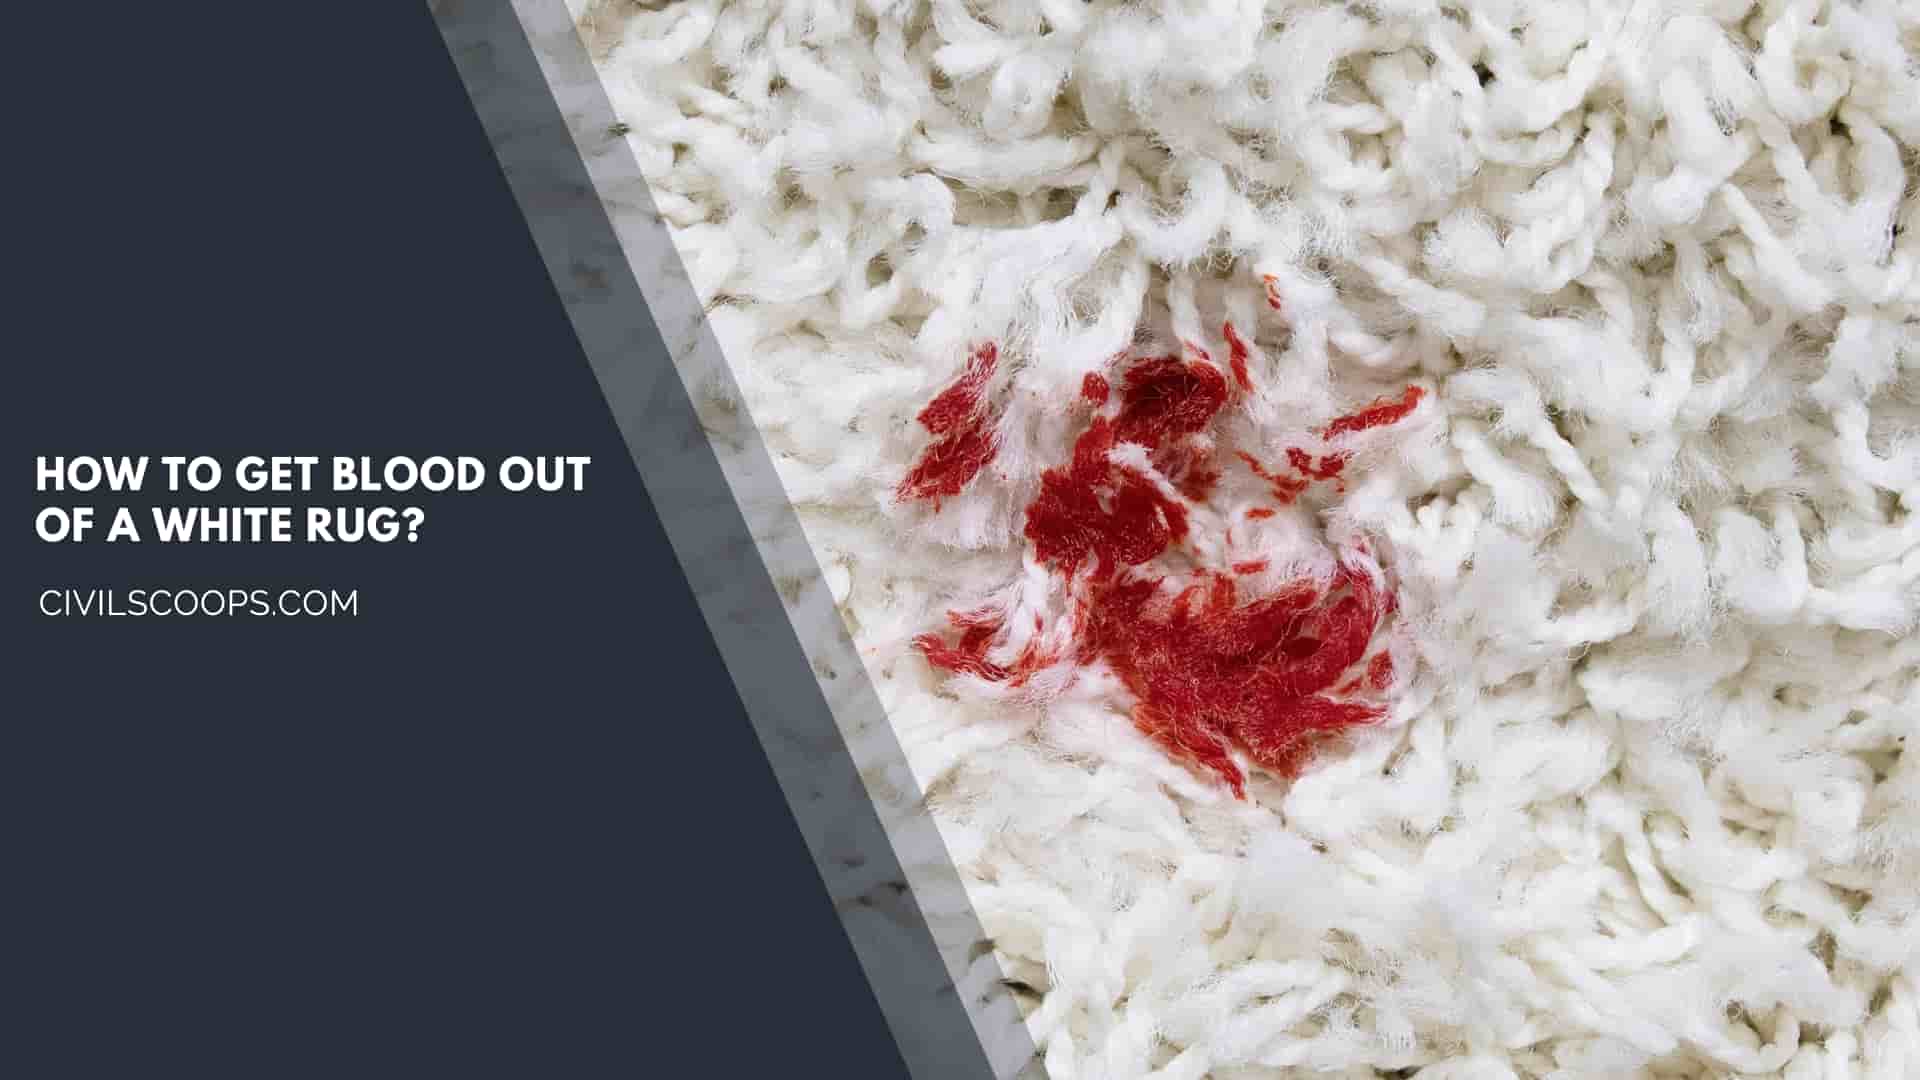 How to Get Blood Out of a White Rug?